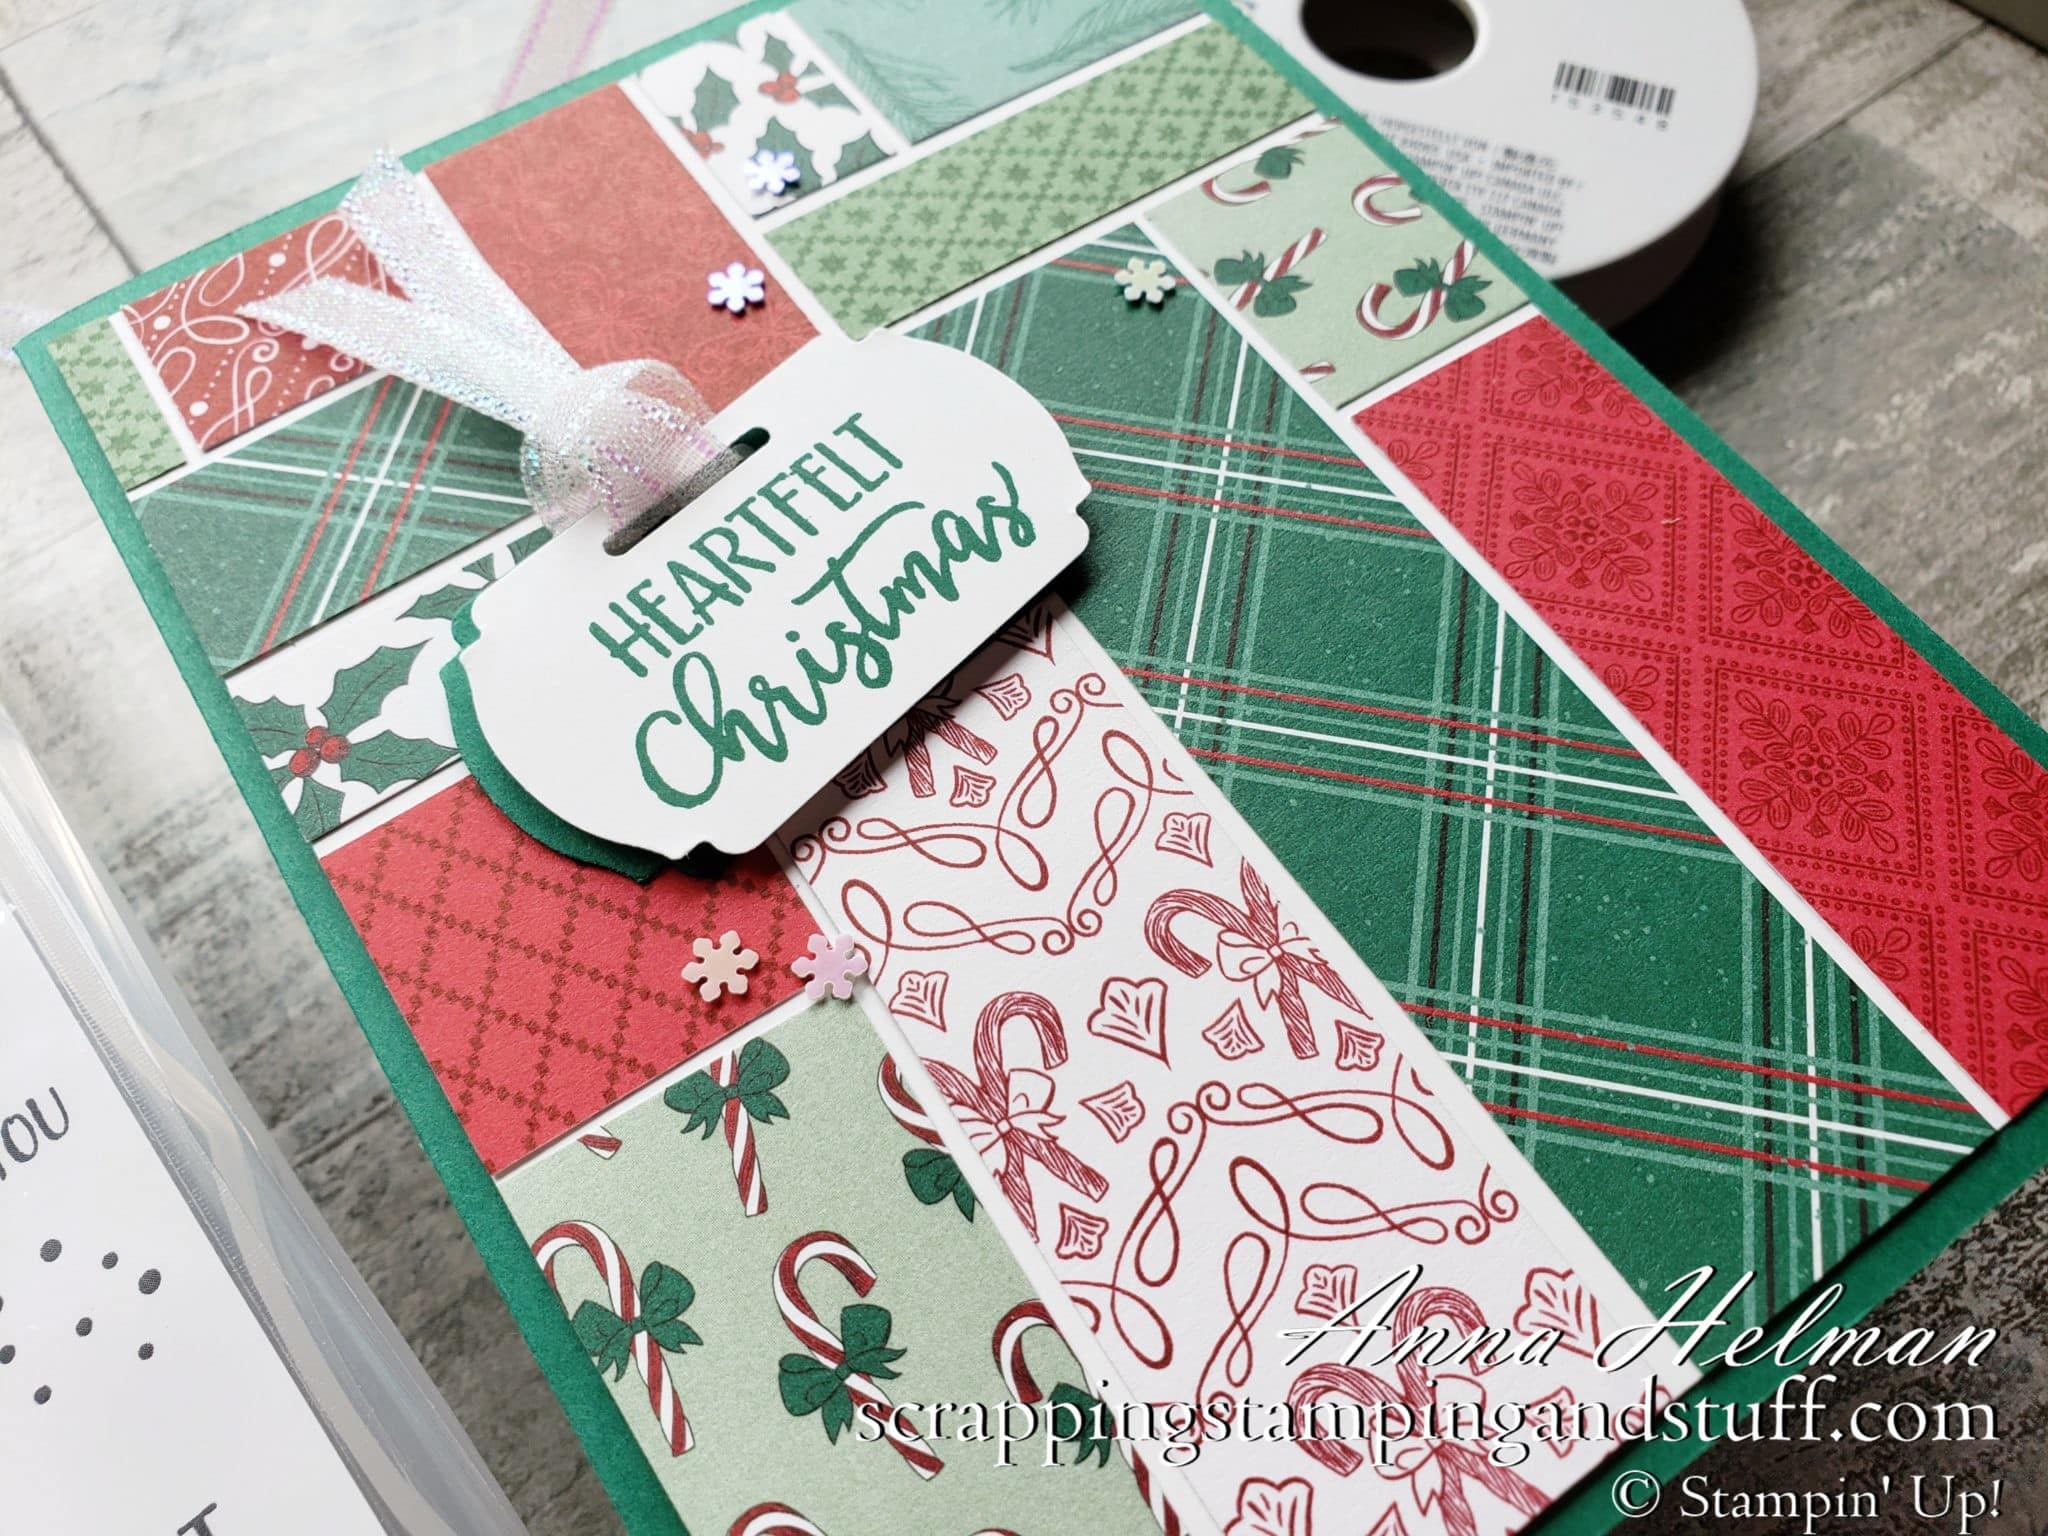 Use Those Paper Scraps With This Simple Card Design